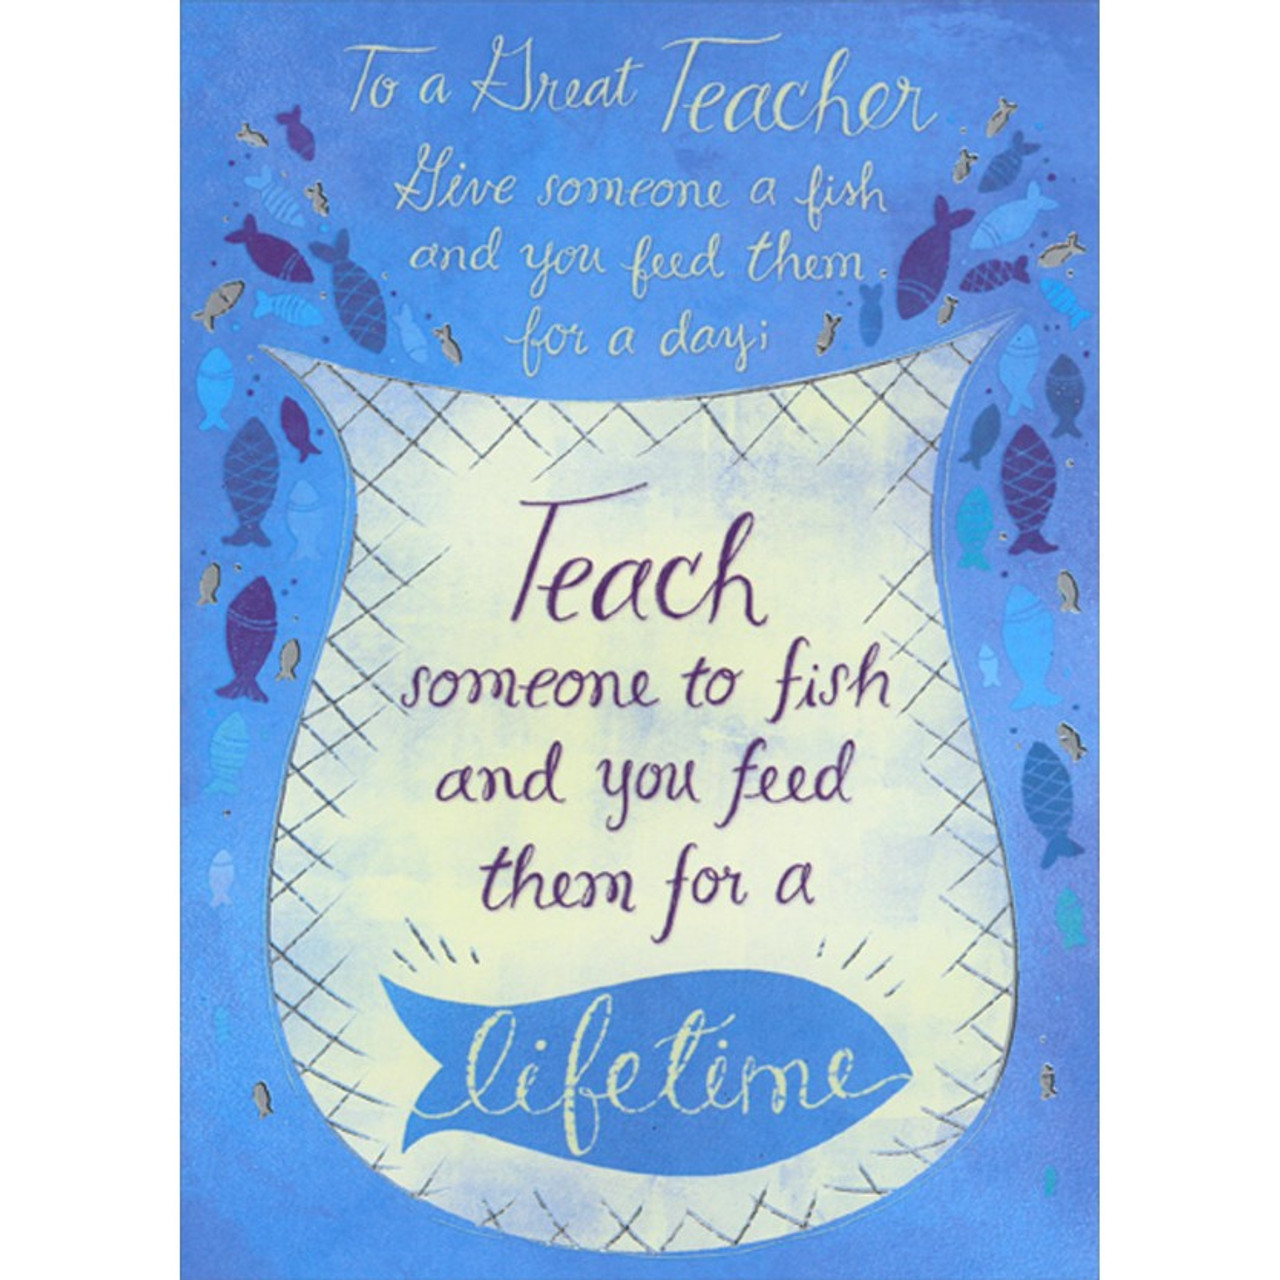 thank you quotes for teachers